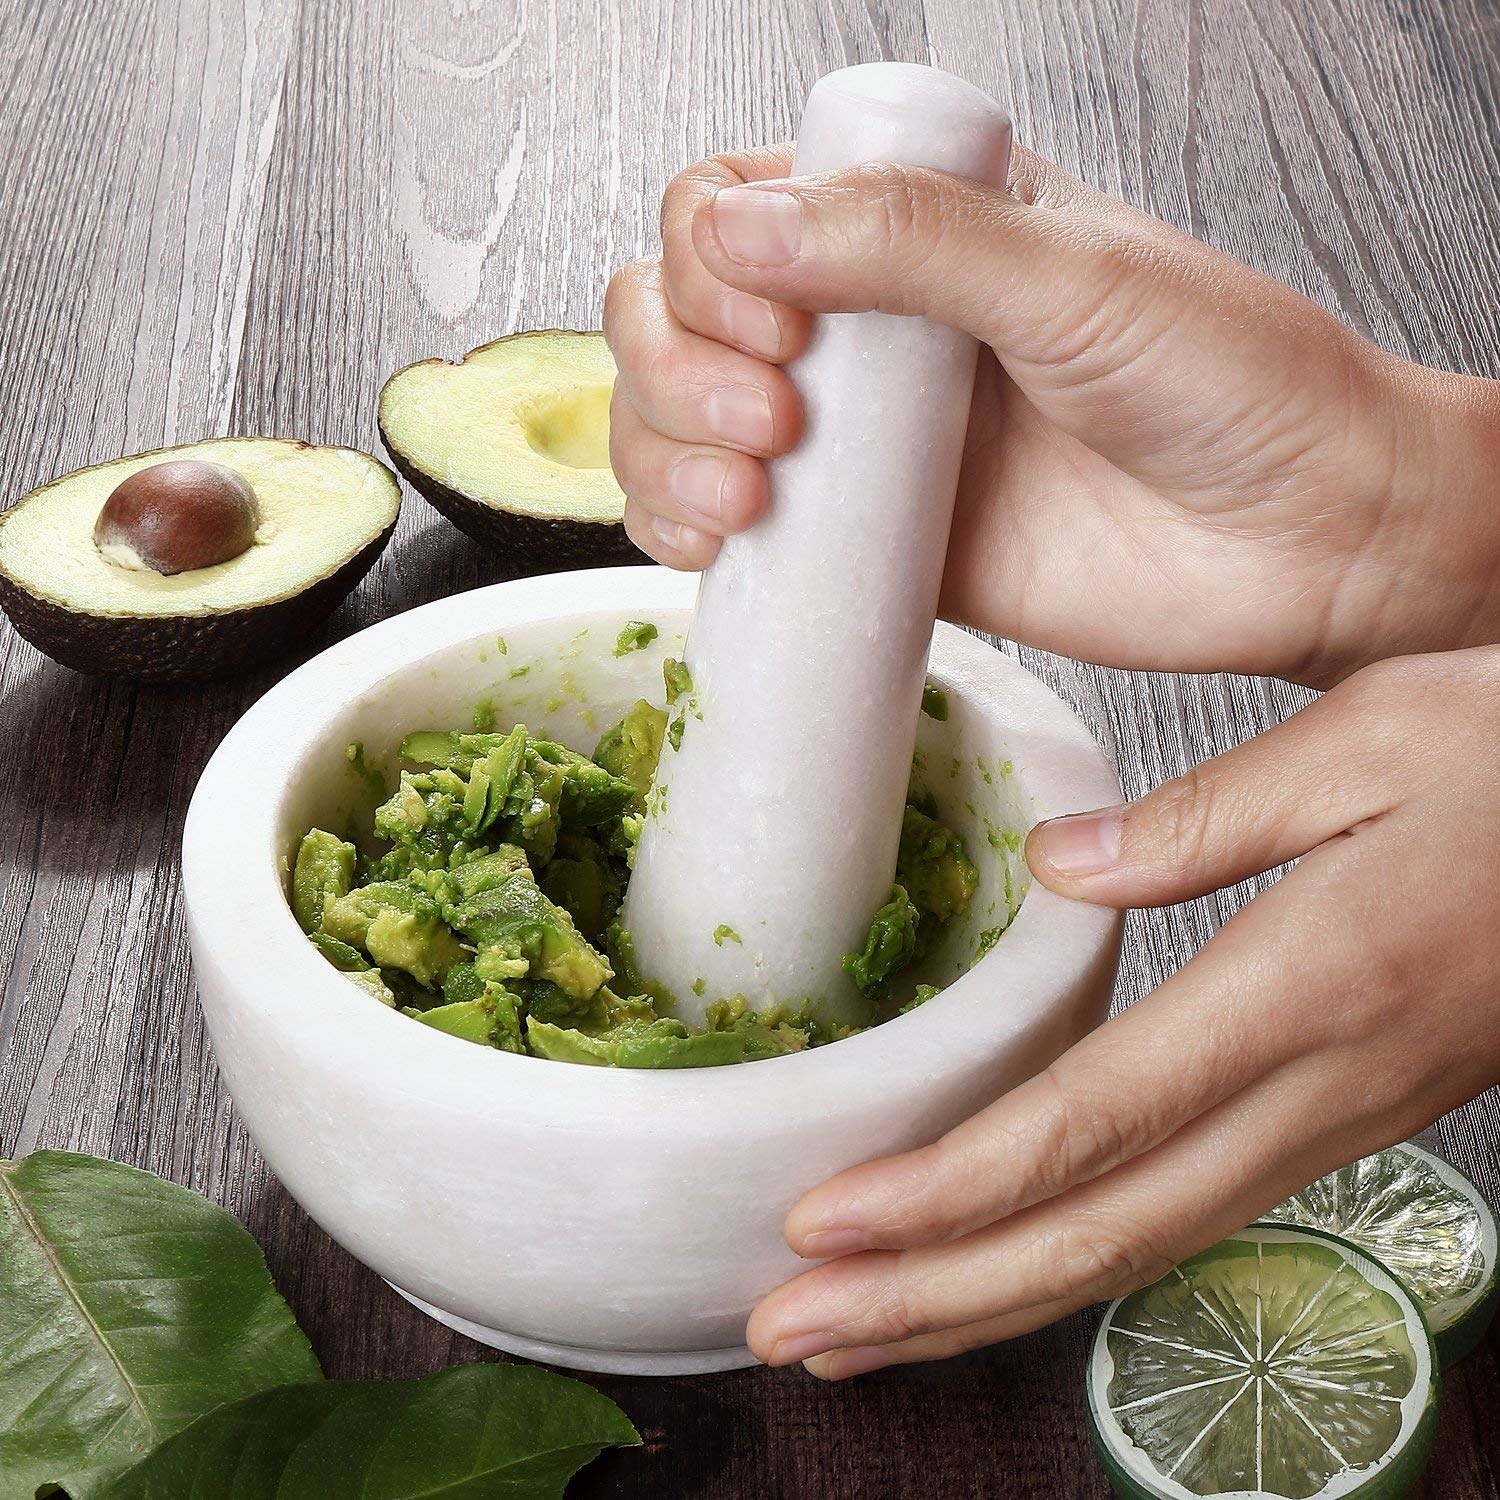 Round white bowl with a hand smashing some avocado with the stick-shaped pestle also in white